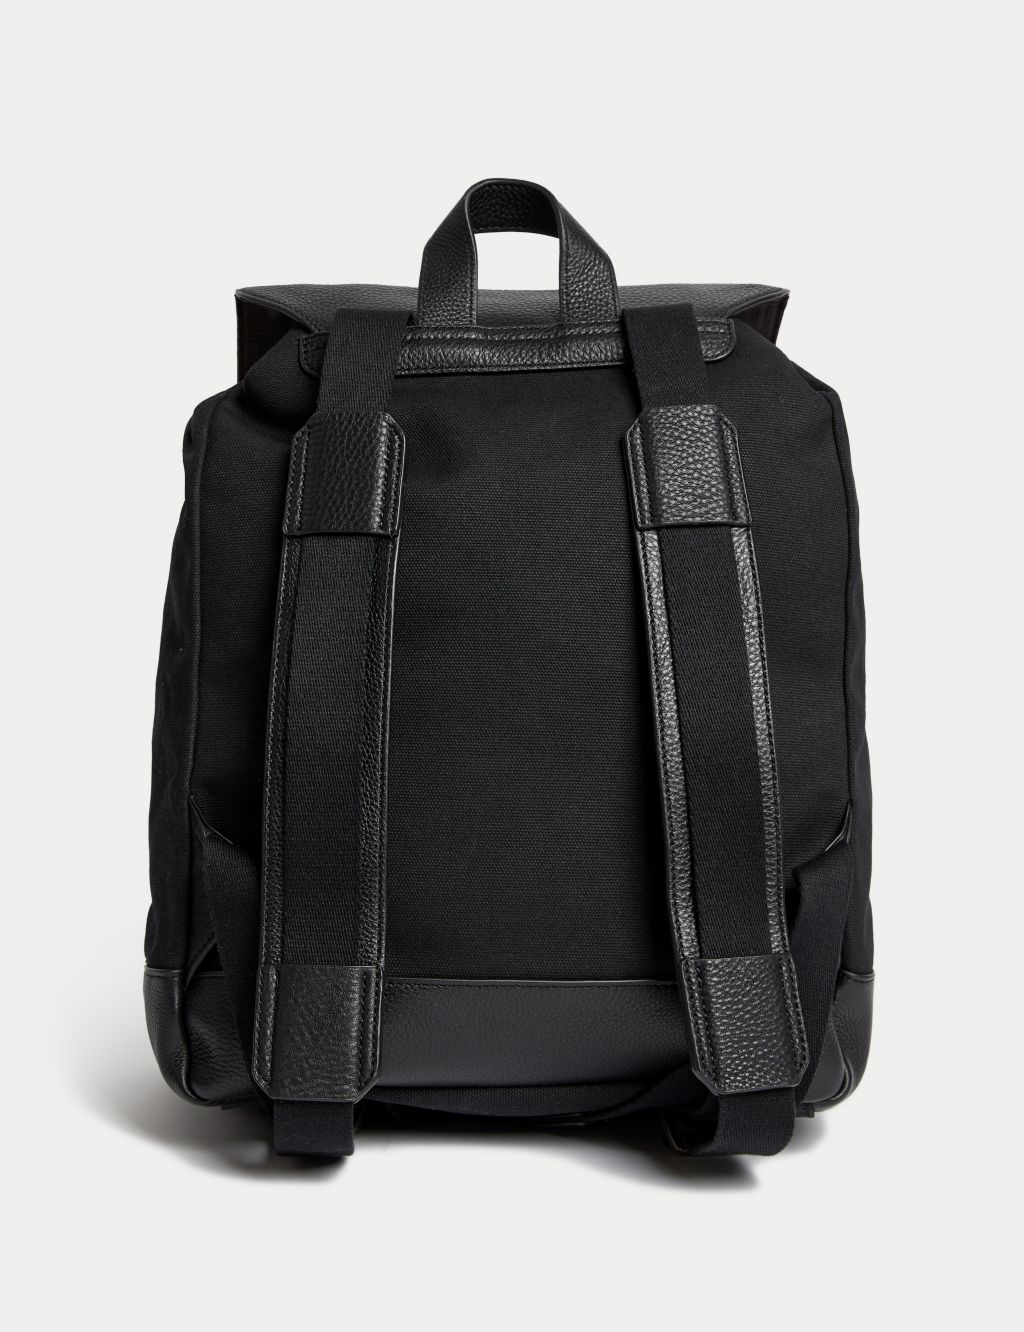 Leather & Cotton Backpack image 3